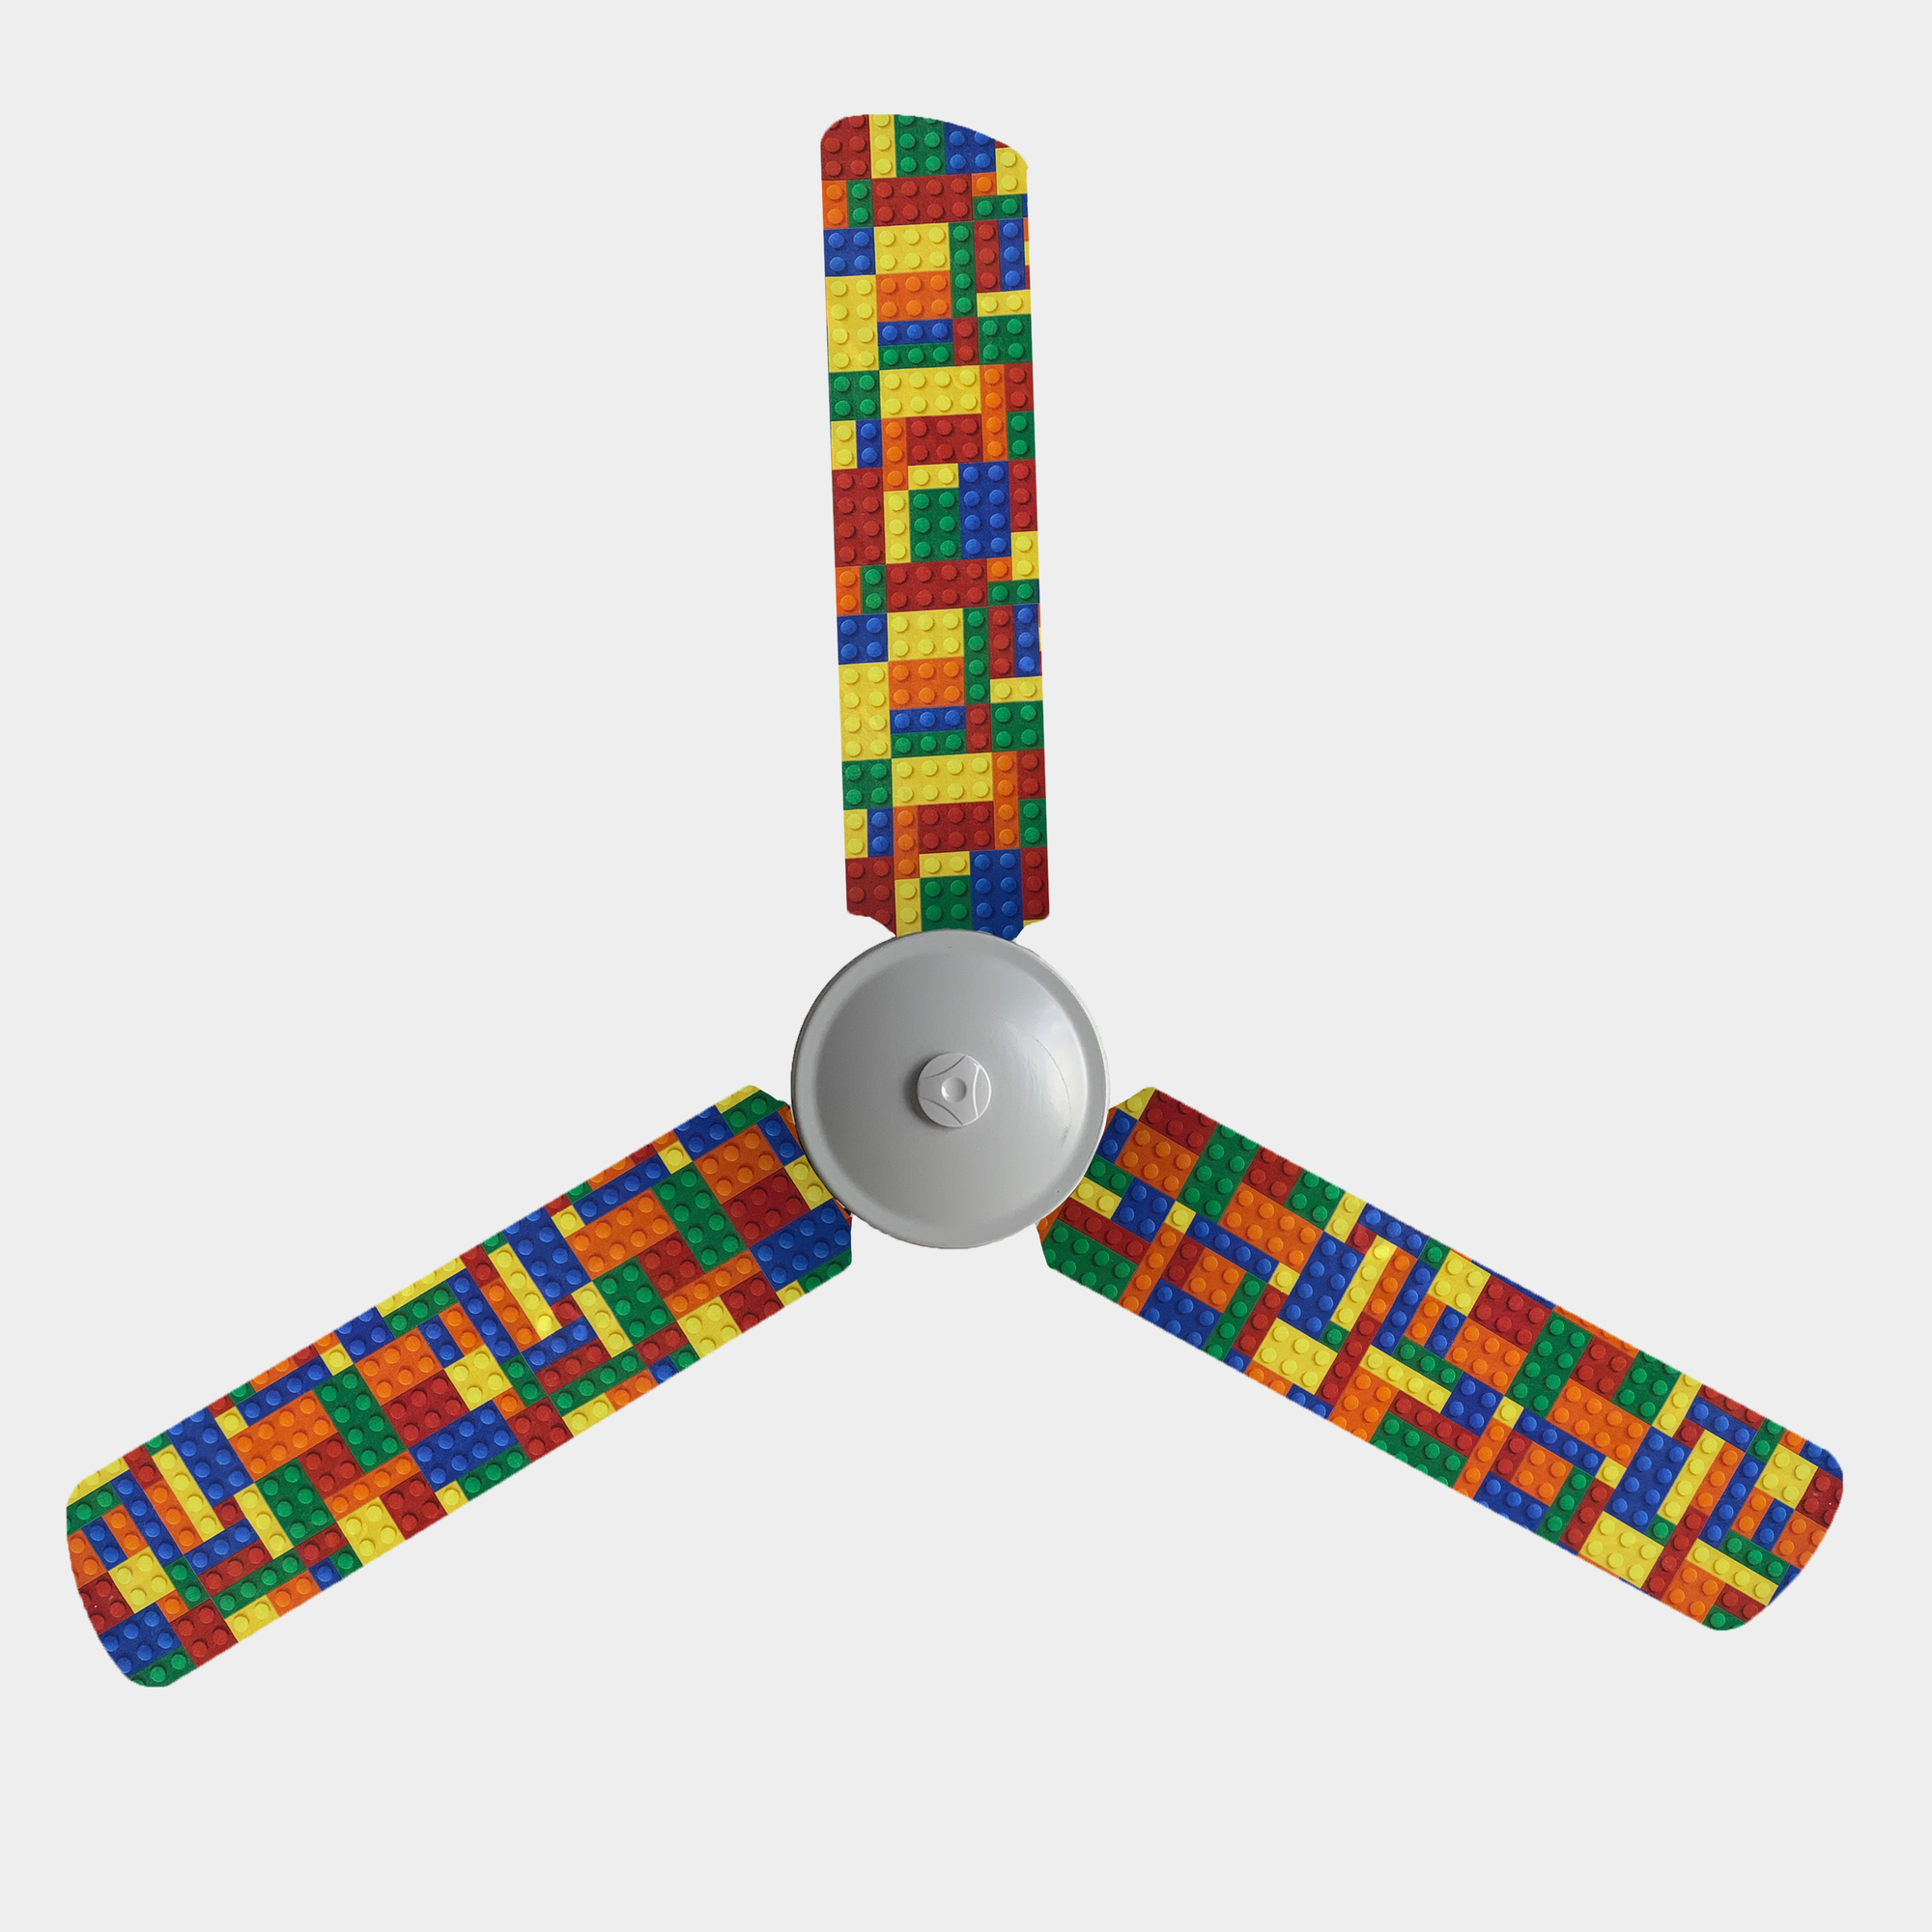 Fan covers with blue, yellow, red, orange, and green toy bricks